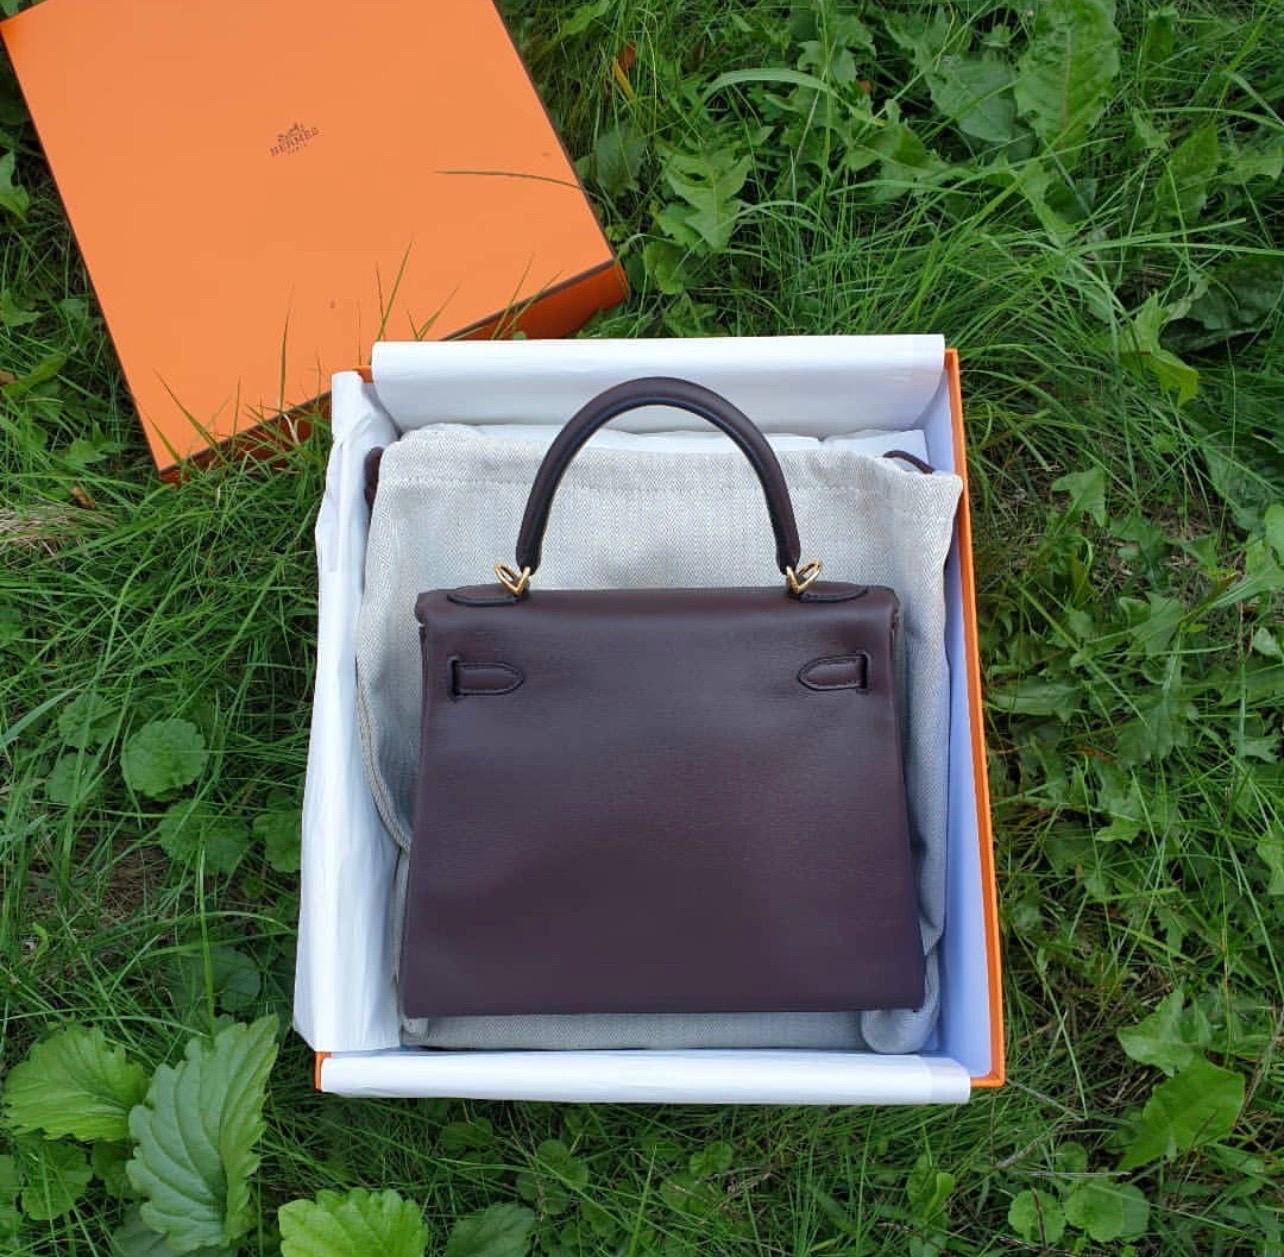 Hermes Kelly II Retourne 25 
Veau Swift 
Rouge Sellier
Gold HW
Was bought on September 06, 2021
Serial number ZBY*****
New, full set.
Invoice included.
For buyers from EU we can provide shipping from Poland. Please demand if you need.